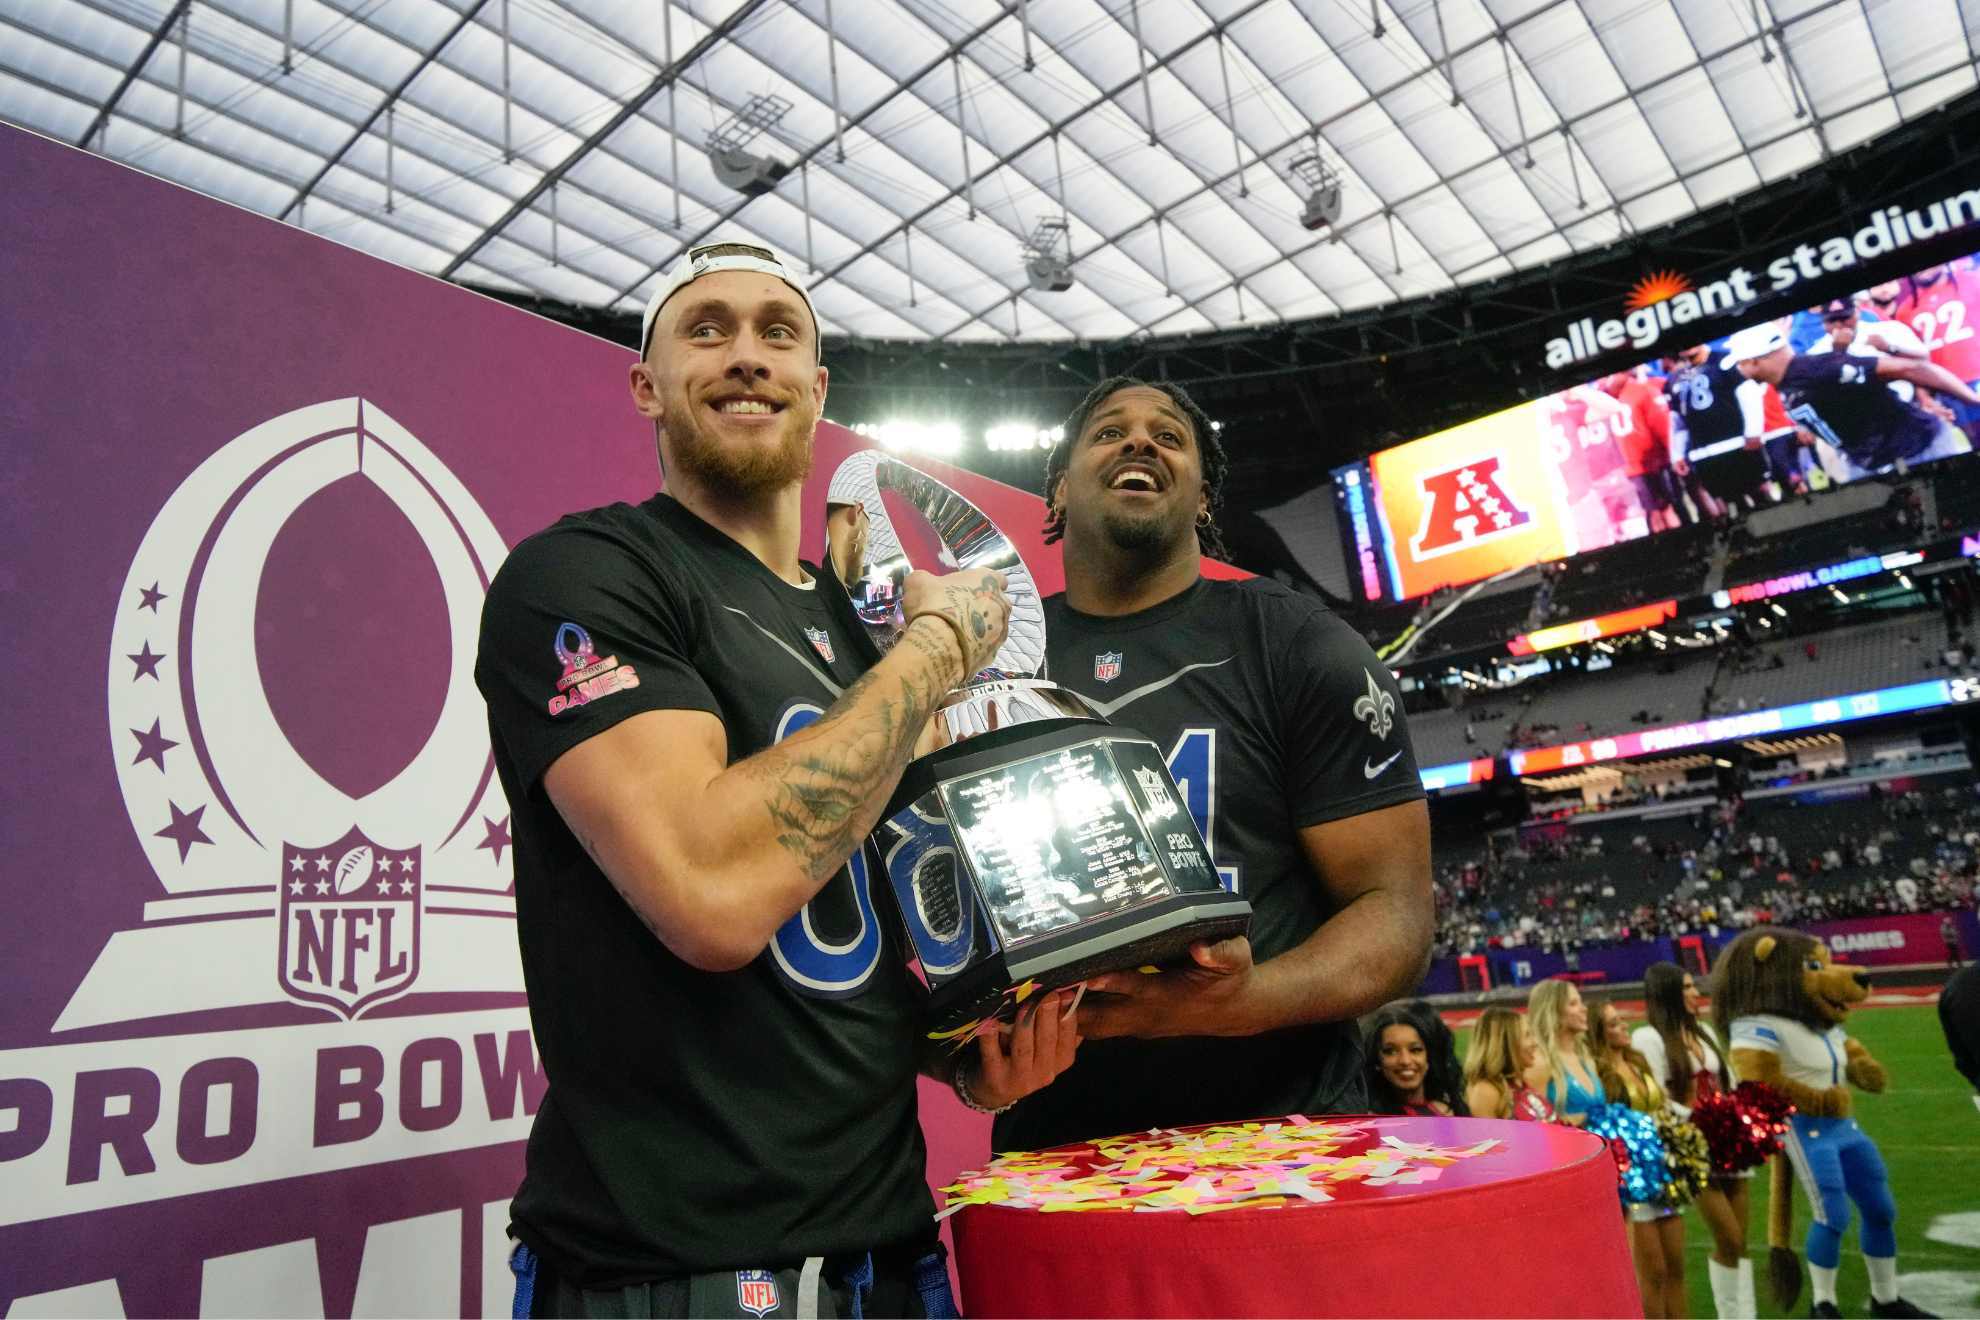 NFC tight end George Kittle, left, of the 49ers, and defensive end Cameron Jordan of the New Orleans Saints hold the trophy after the NFC defeated AFC at the NFL Pro Bowl games.